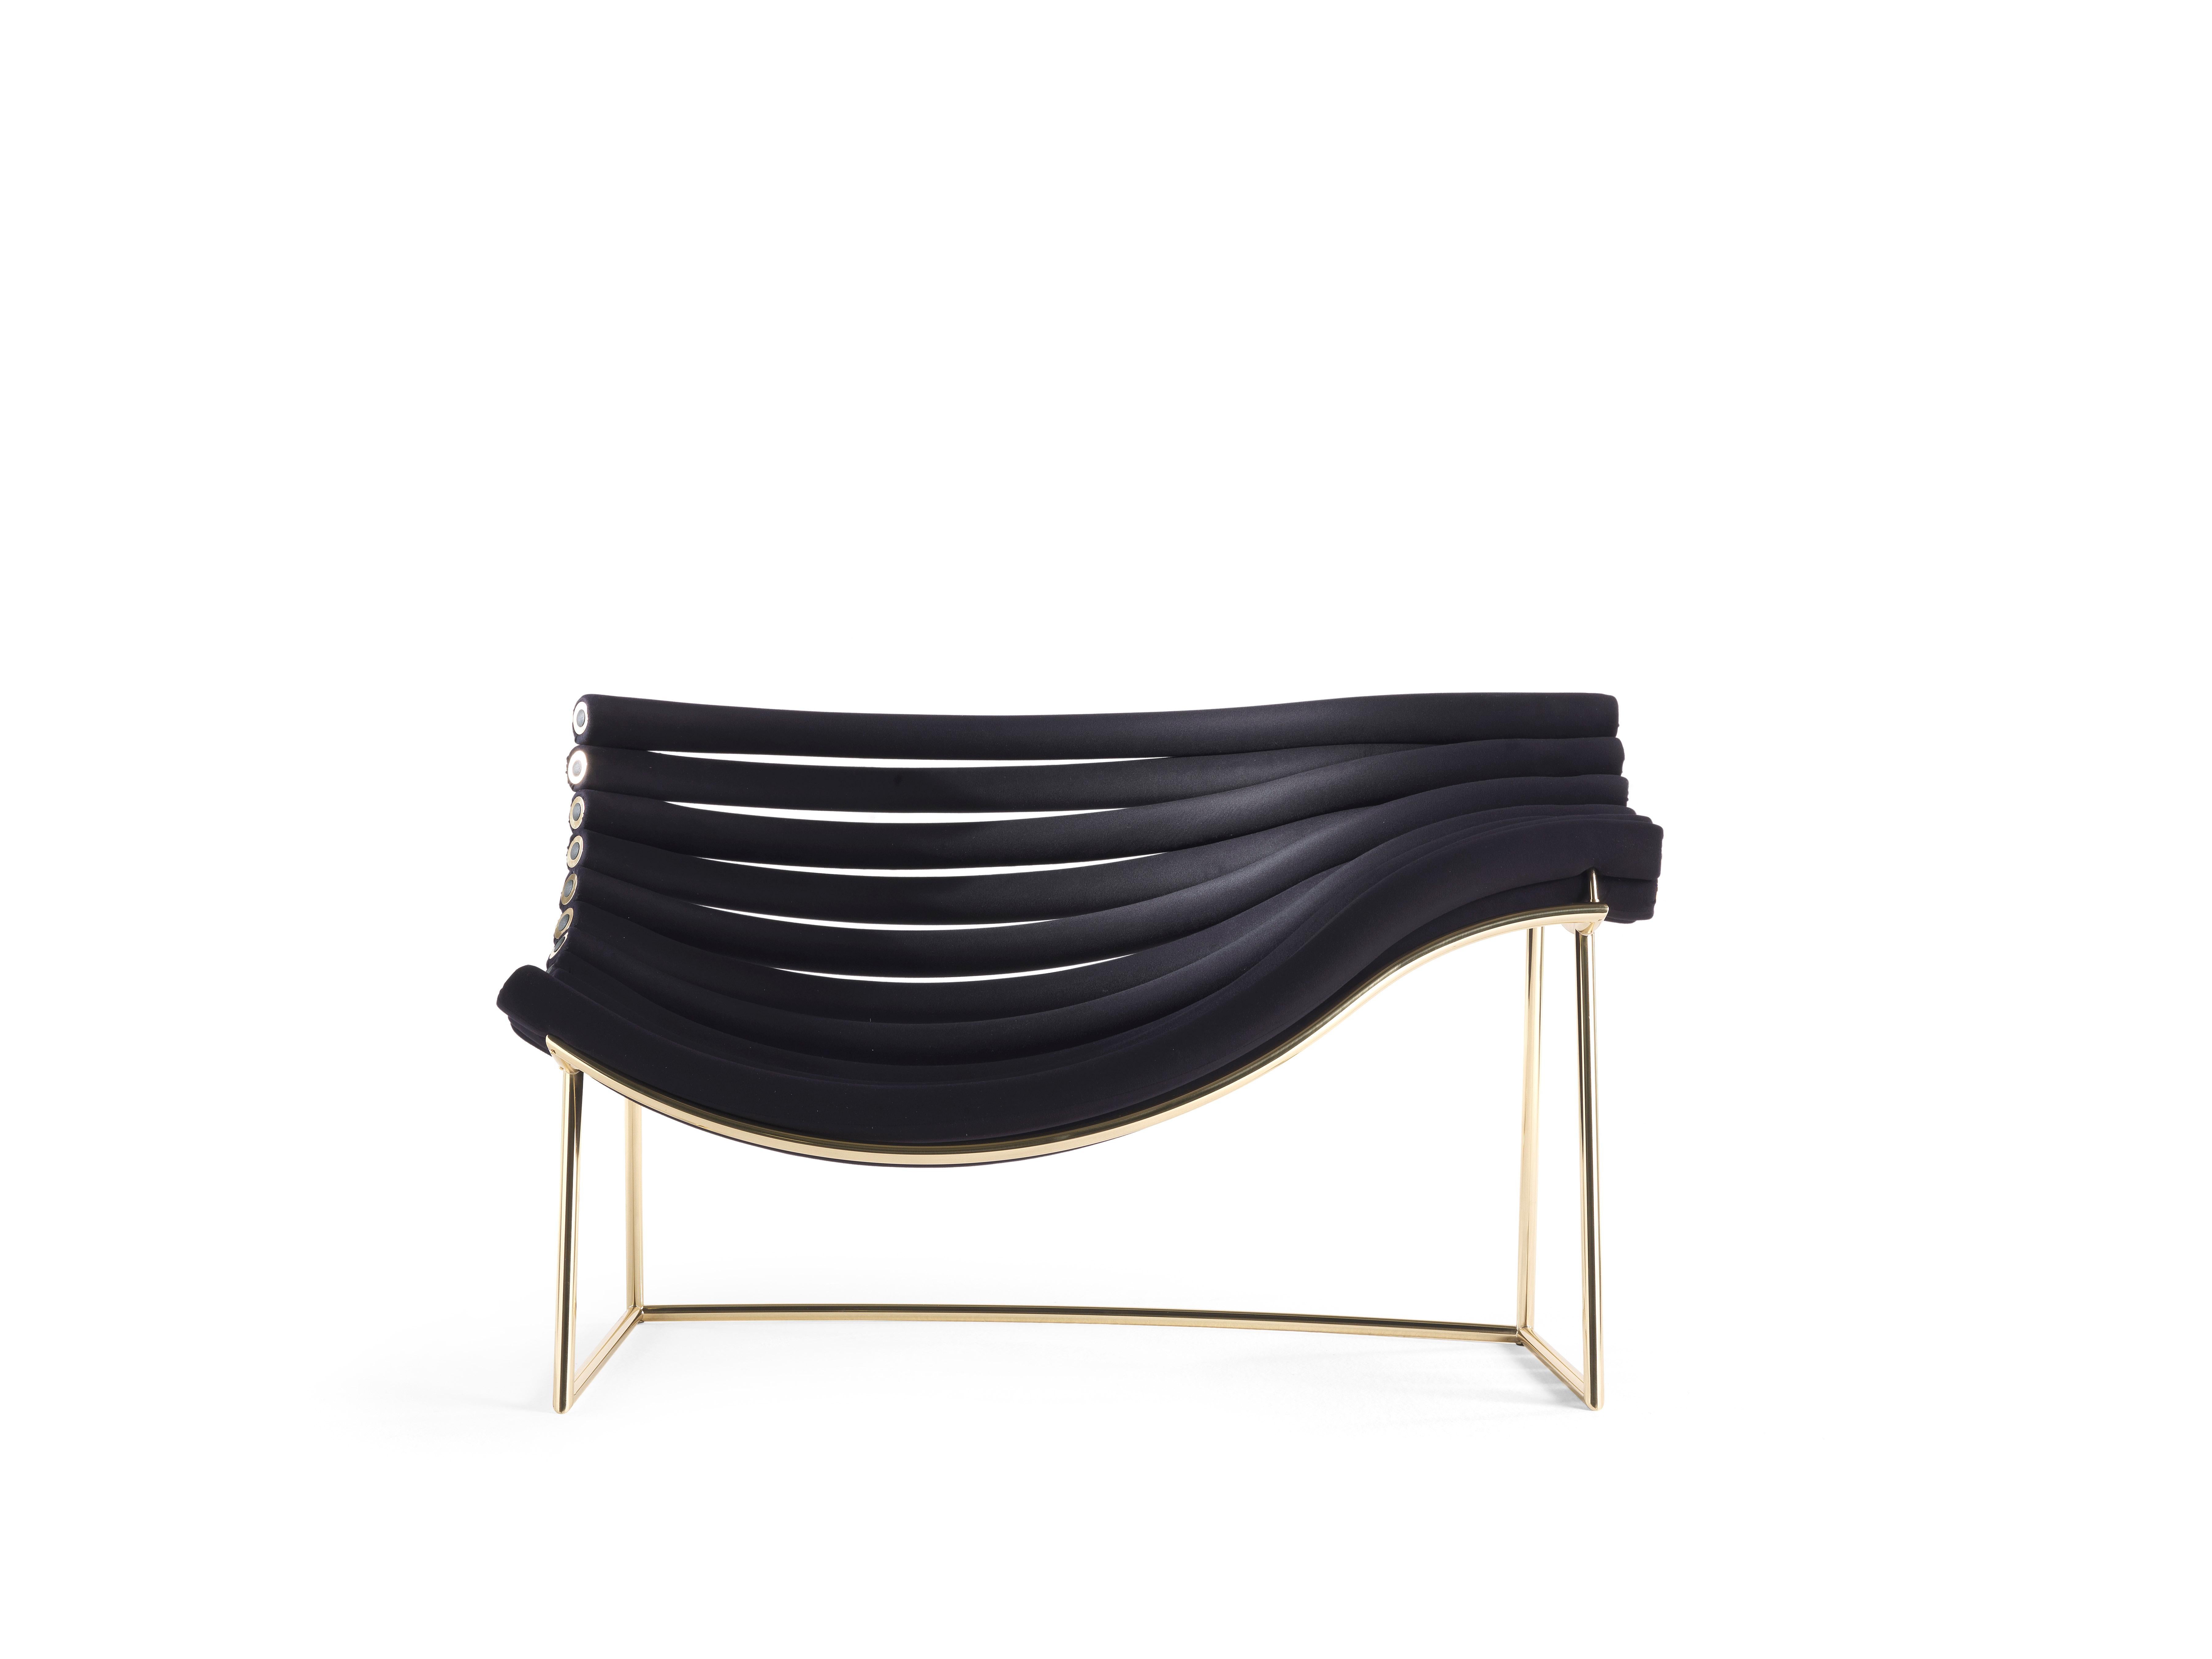 Amadea armchair by Debonademeo
Materials: Metal structure with polished gold finish, metal tubes covered in foam, upholstery in black elastic fabric.
Dimensions: 100 x 147 x 80 cm

Amedea is the materialization of the invisible, floating paths